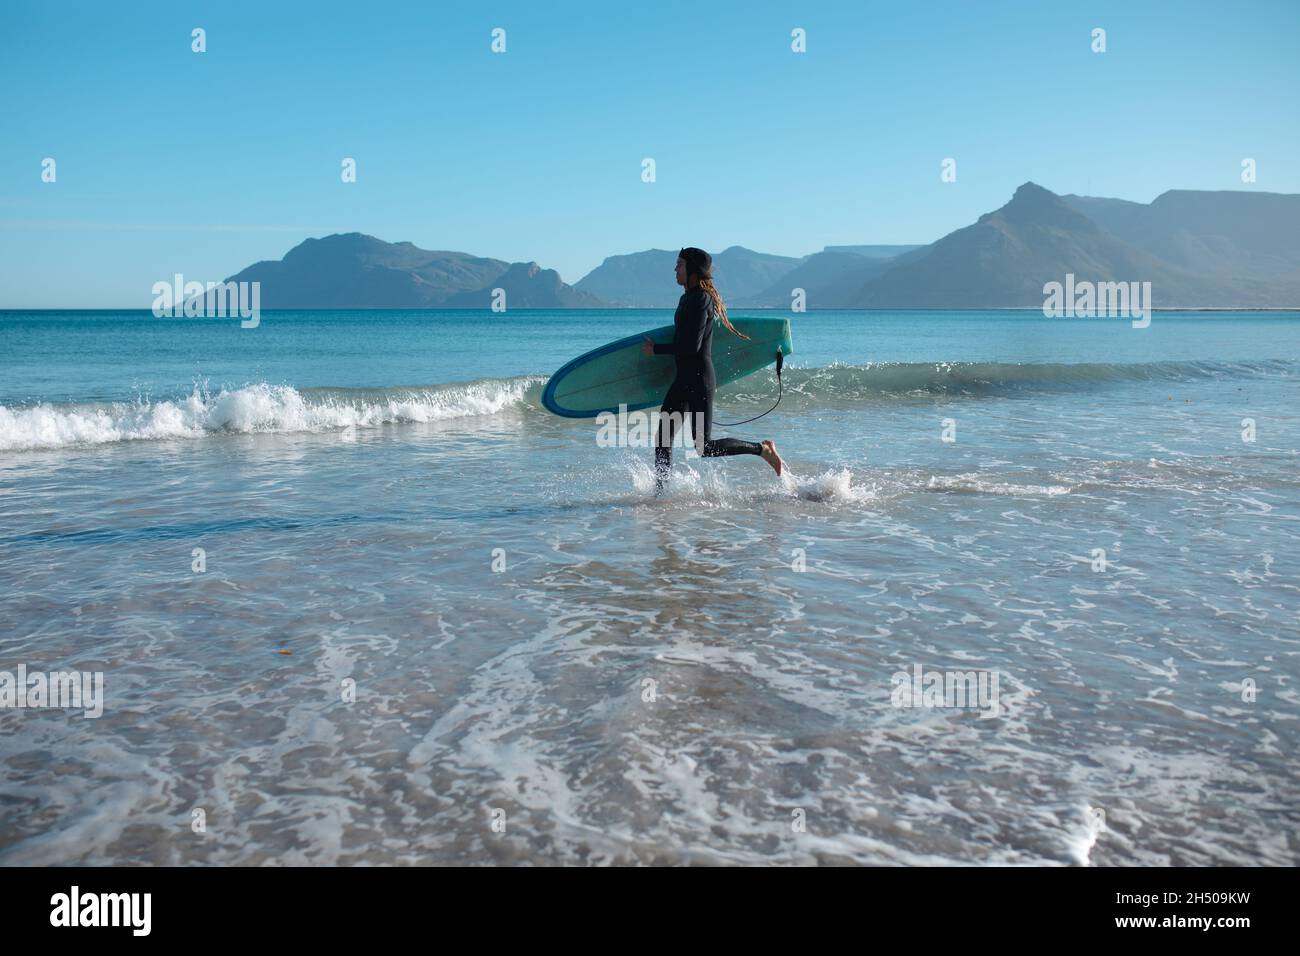 Man carrying surfboard running while splashing water on shore against blue sky with copy space Stock Photo